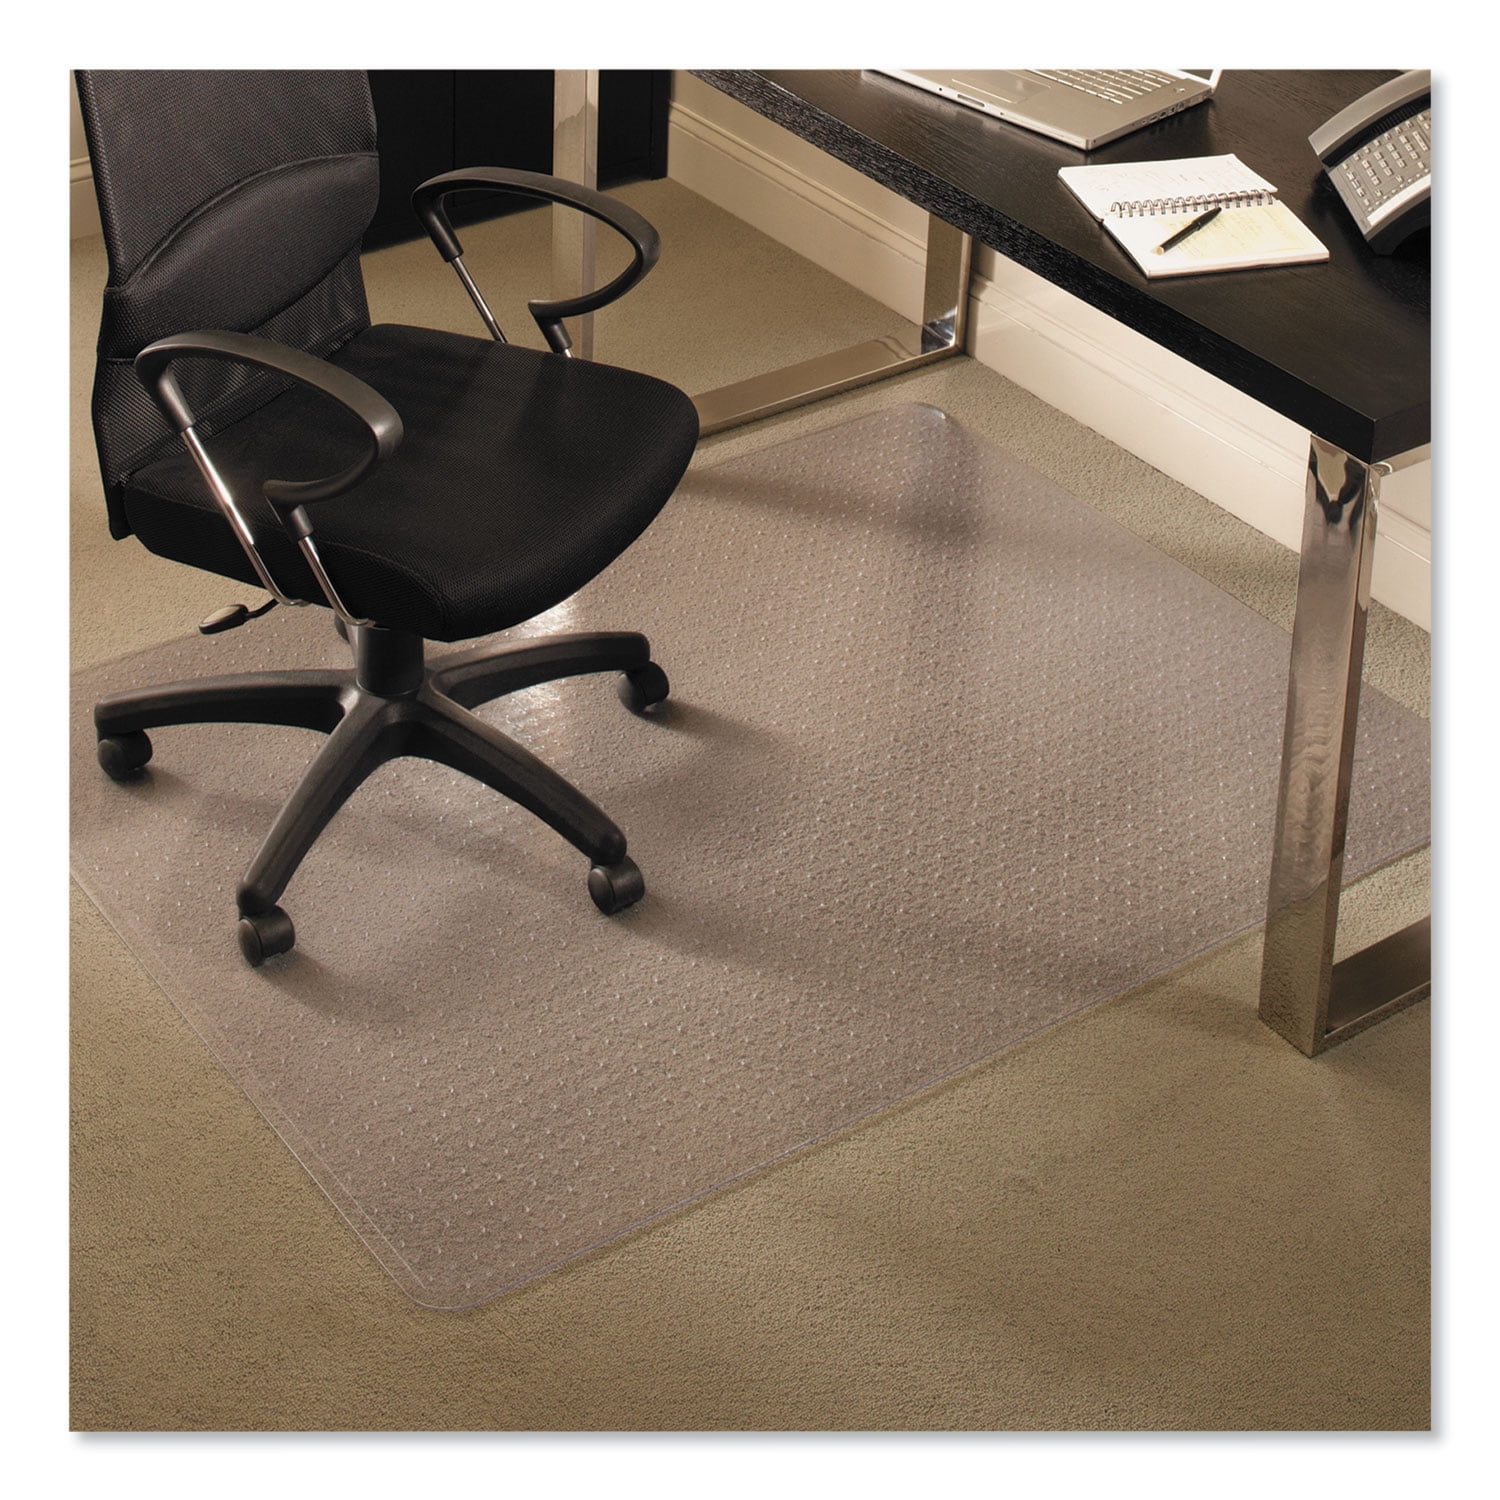 Floor Mat for Office Chair -Desk Mat&Office Mat for Hardwood Floor-Sturdy&Durable Rolling Chairs Immediately Flat When Taken Out of Box: 30x48 Polycarbonate Office Chair Mat for Hardwood Floor 